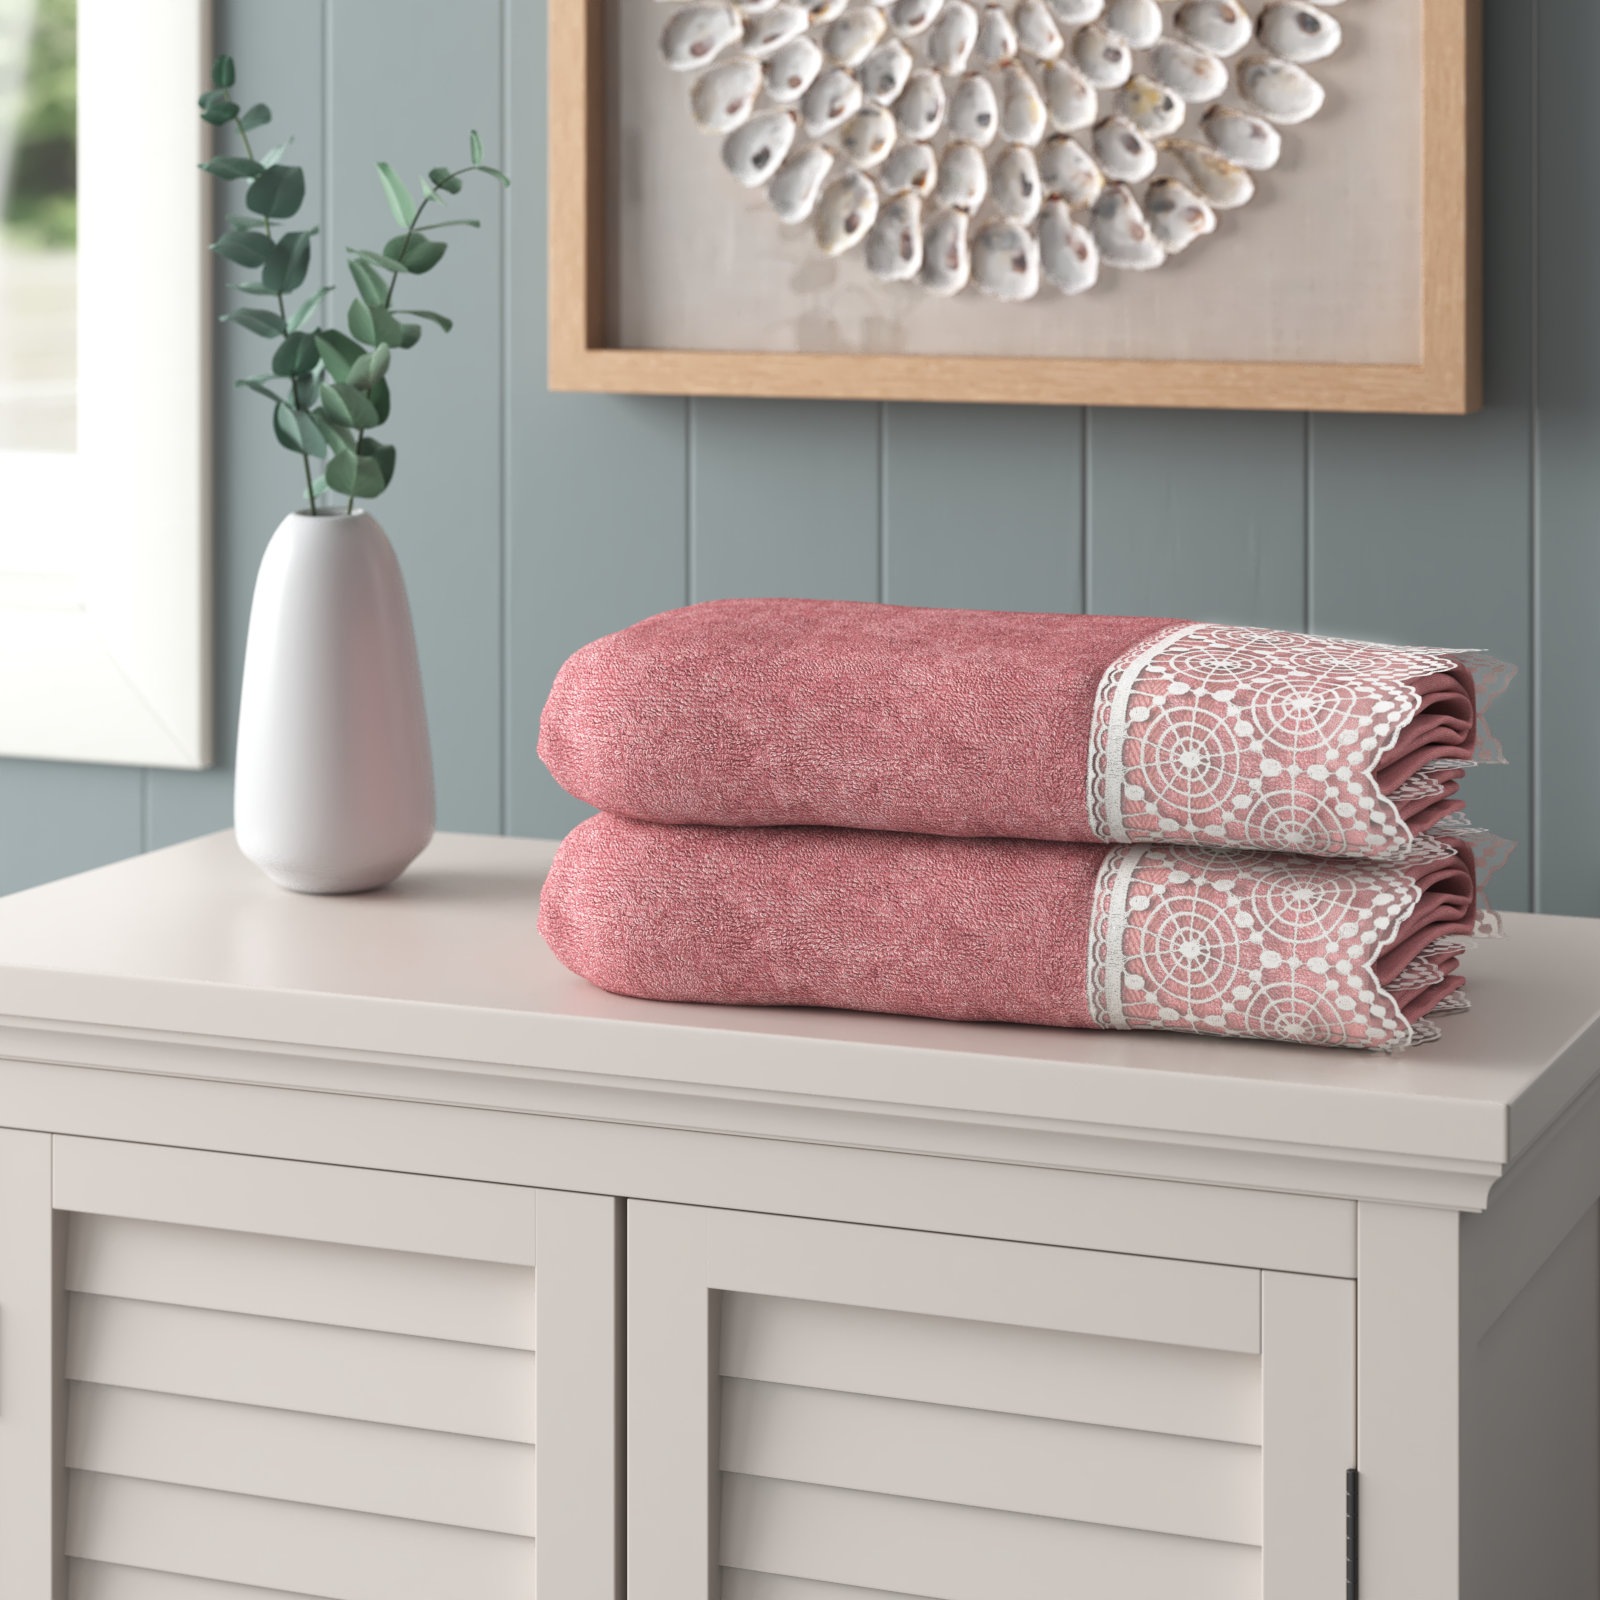 American Fluffy Towel 3-Piece Towel Set Turkish Cotton, Contains 1 Bath Towel, 1 Hand Towel, 1 Wash Clothes -Highly Absorbent Towels for Bathroom